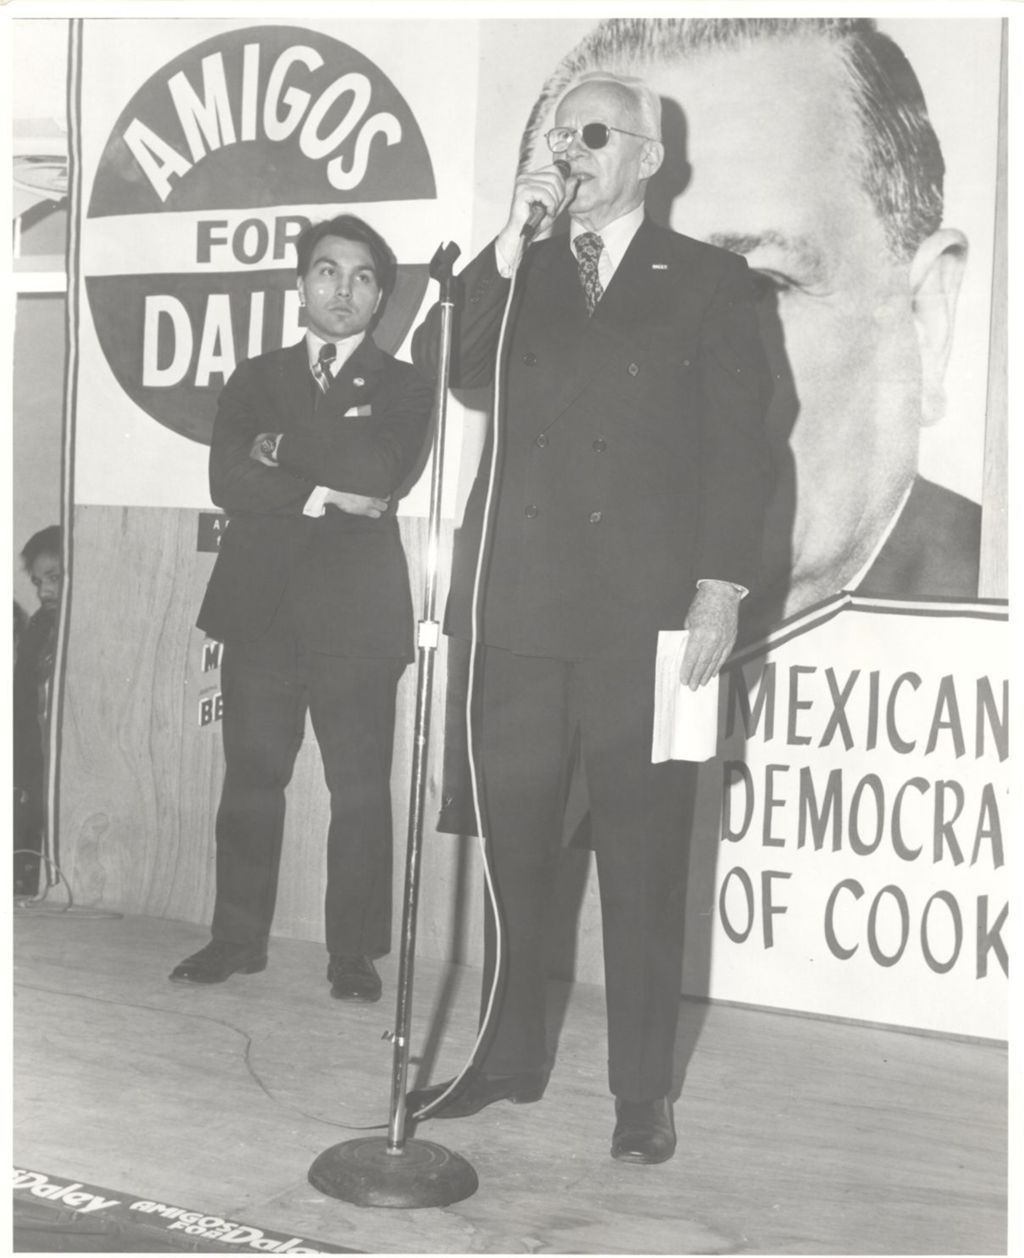 Mexican American Democratic Organization mayoral campaign event, Col. Jack Reilly speaking